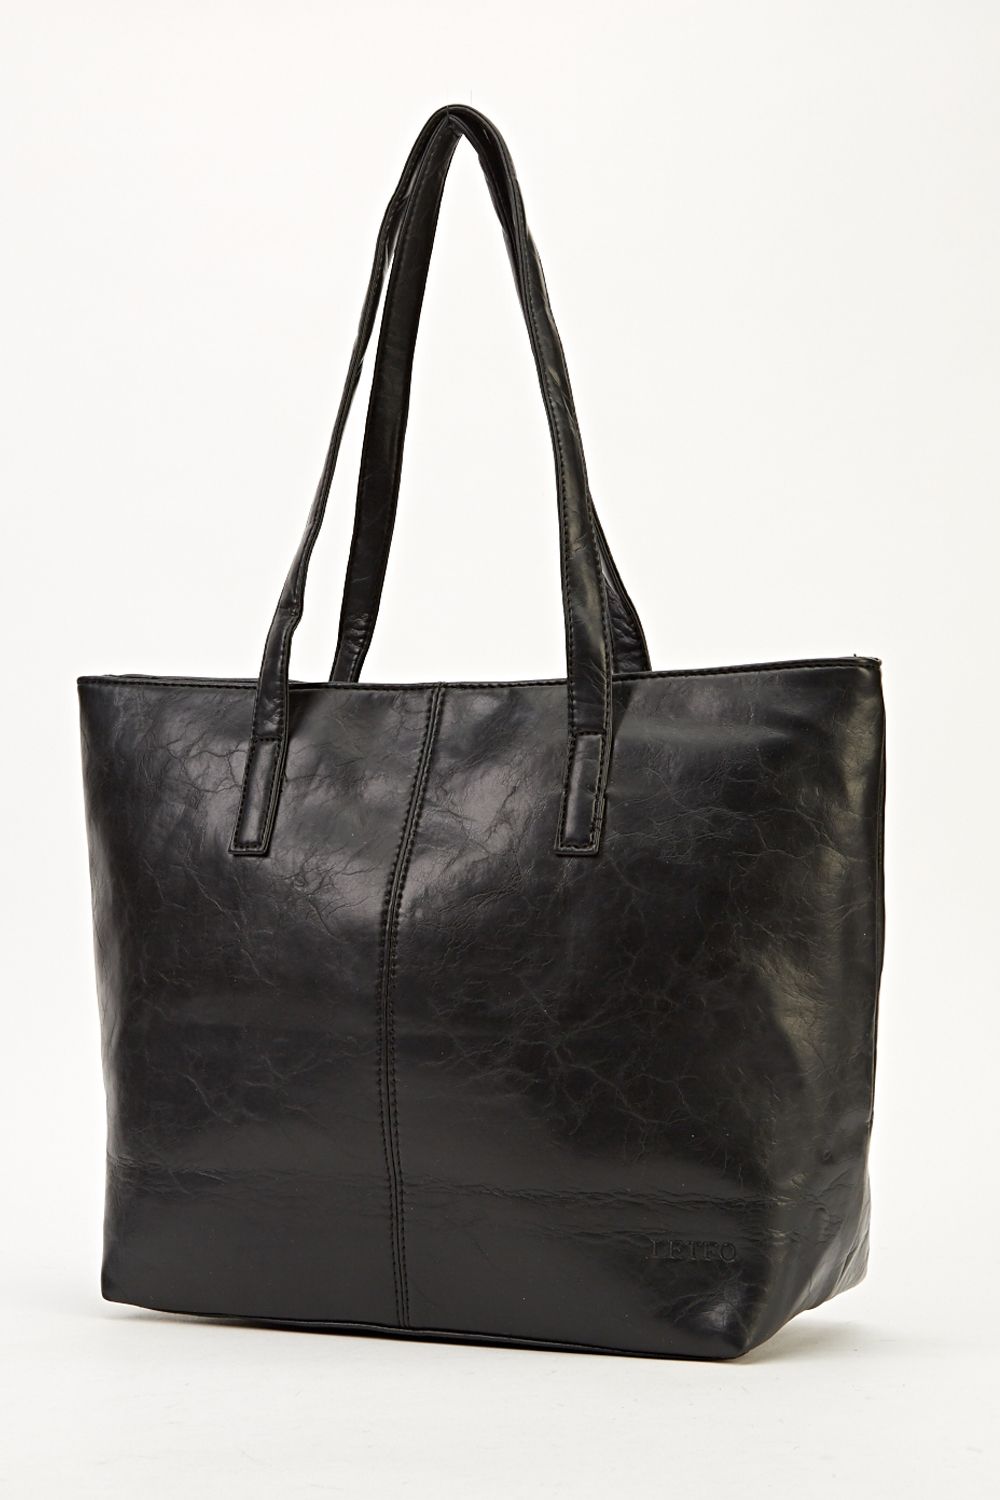 Faux Leather Black Tote Bag - Just $7